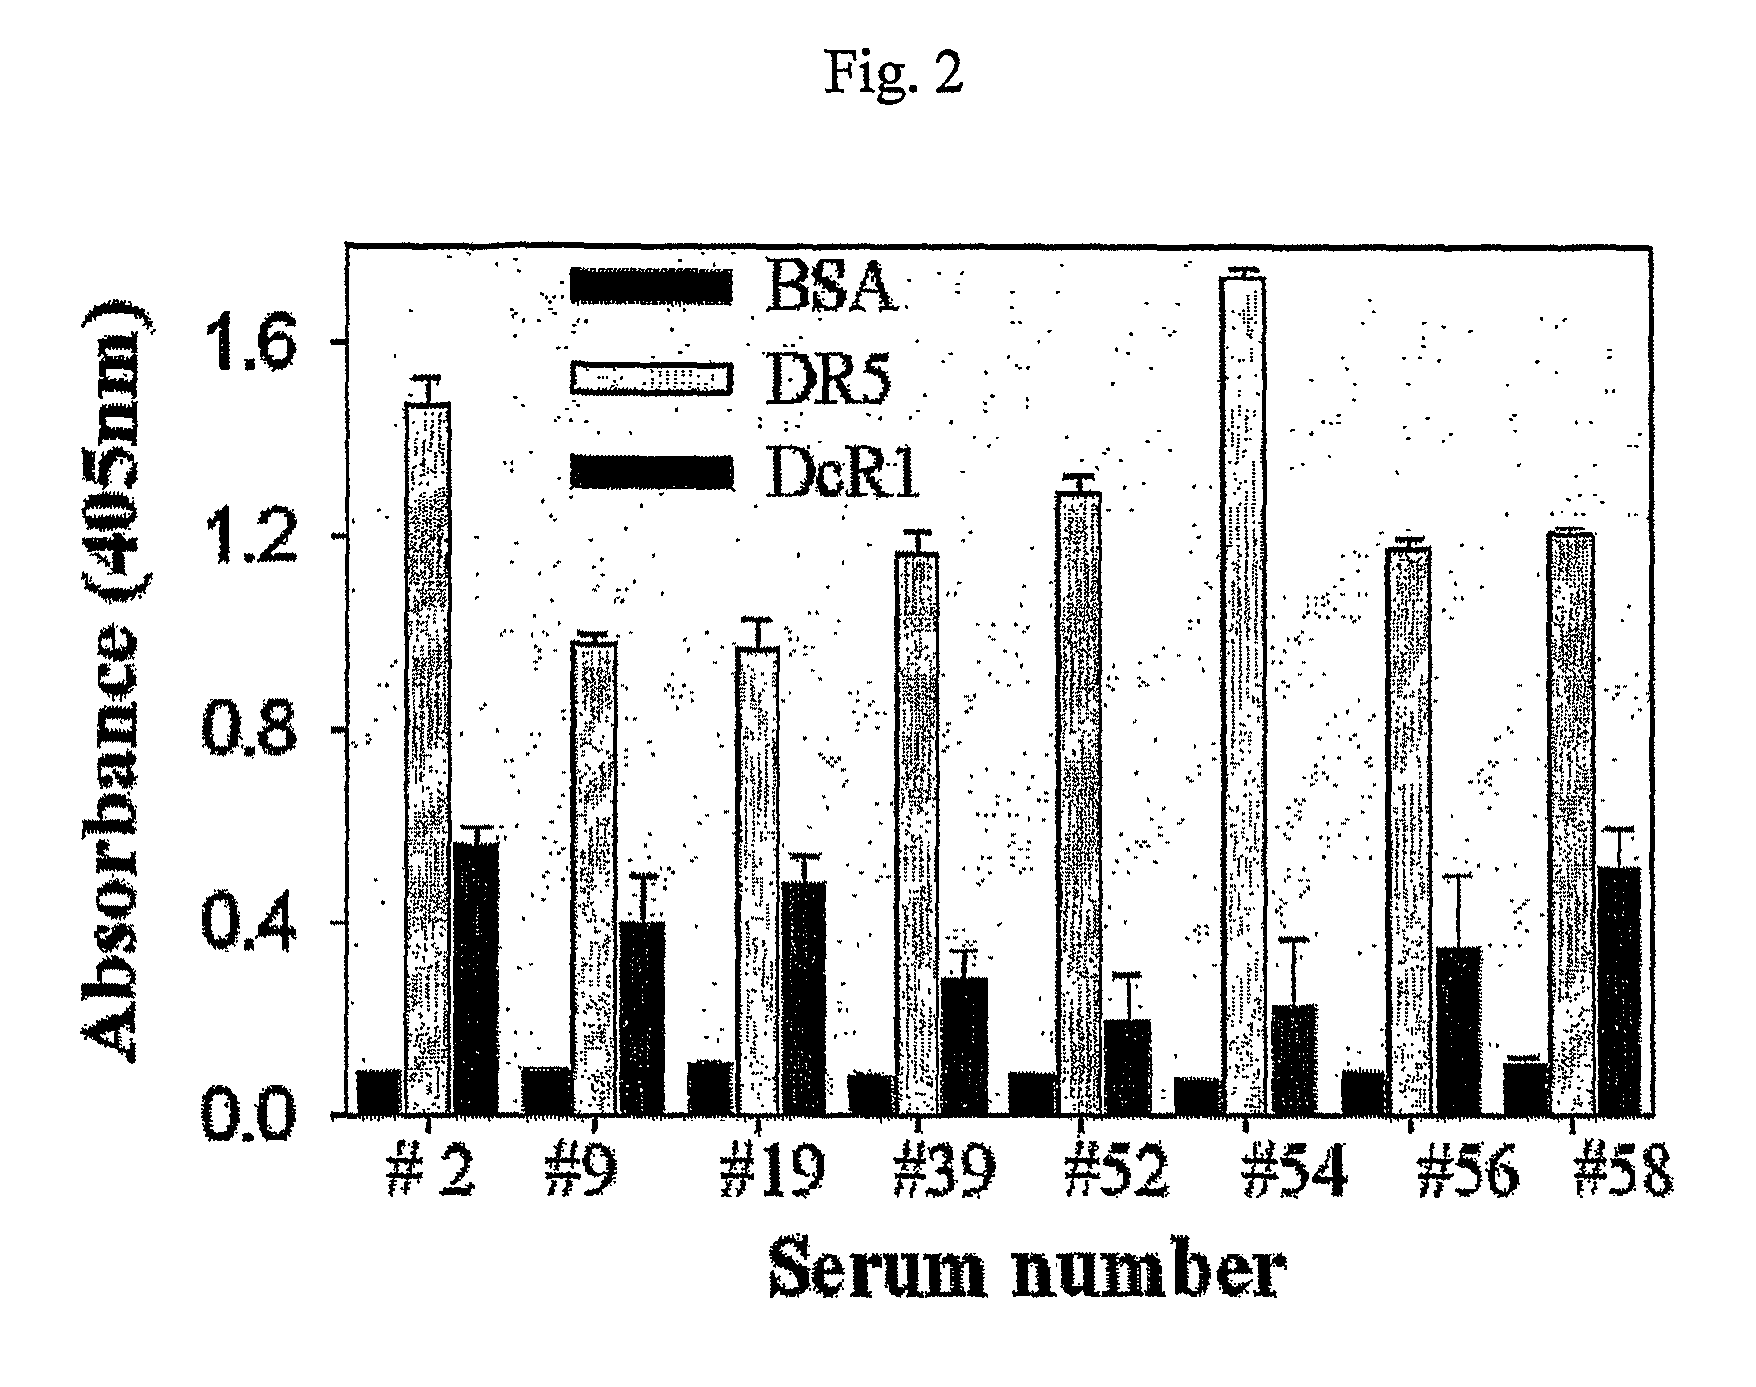 Antibody specifically binding to DR5 and composition for preventing or treating cancers comprising the same